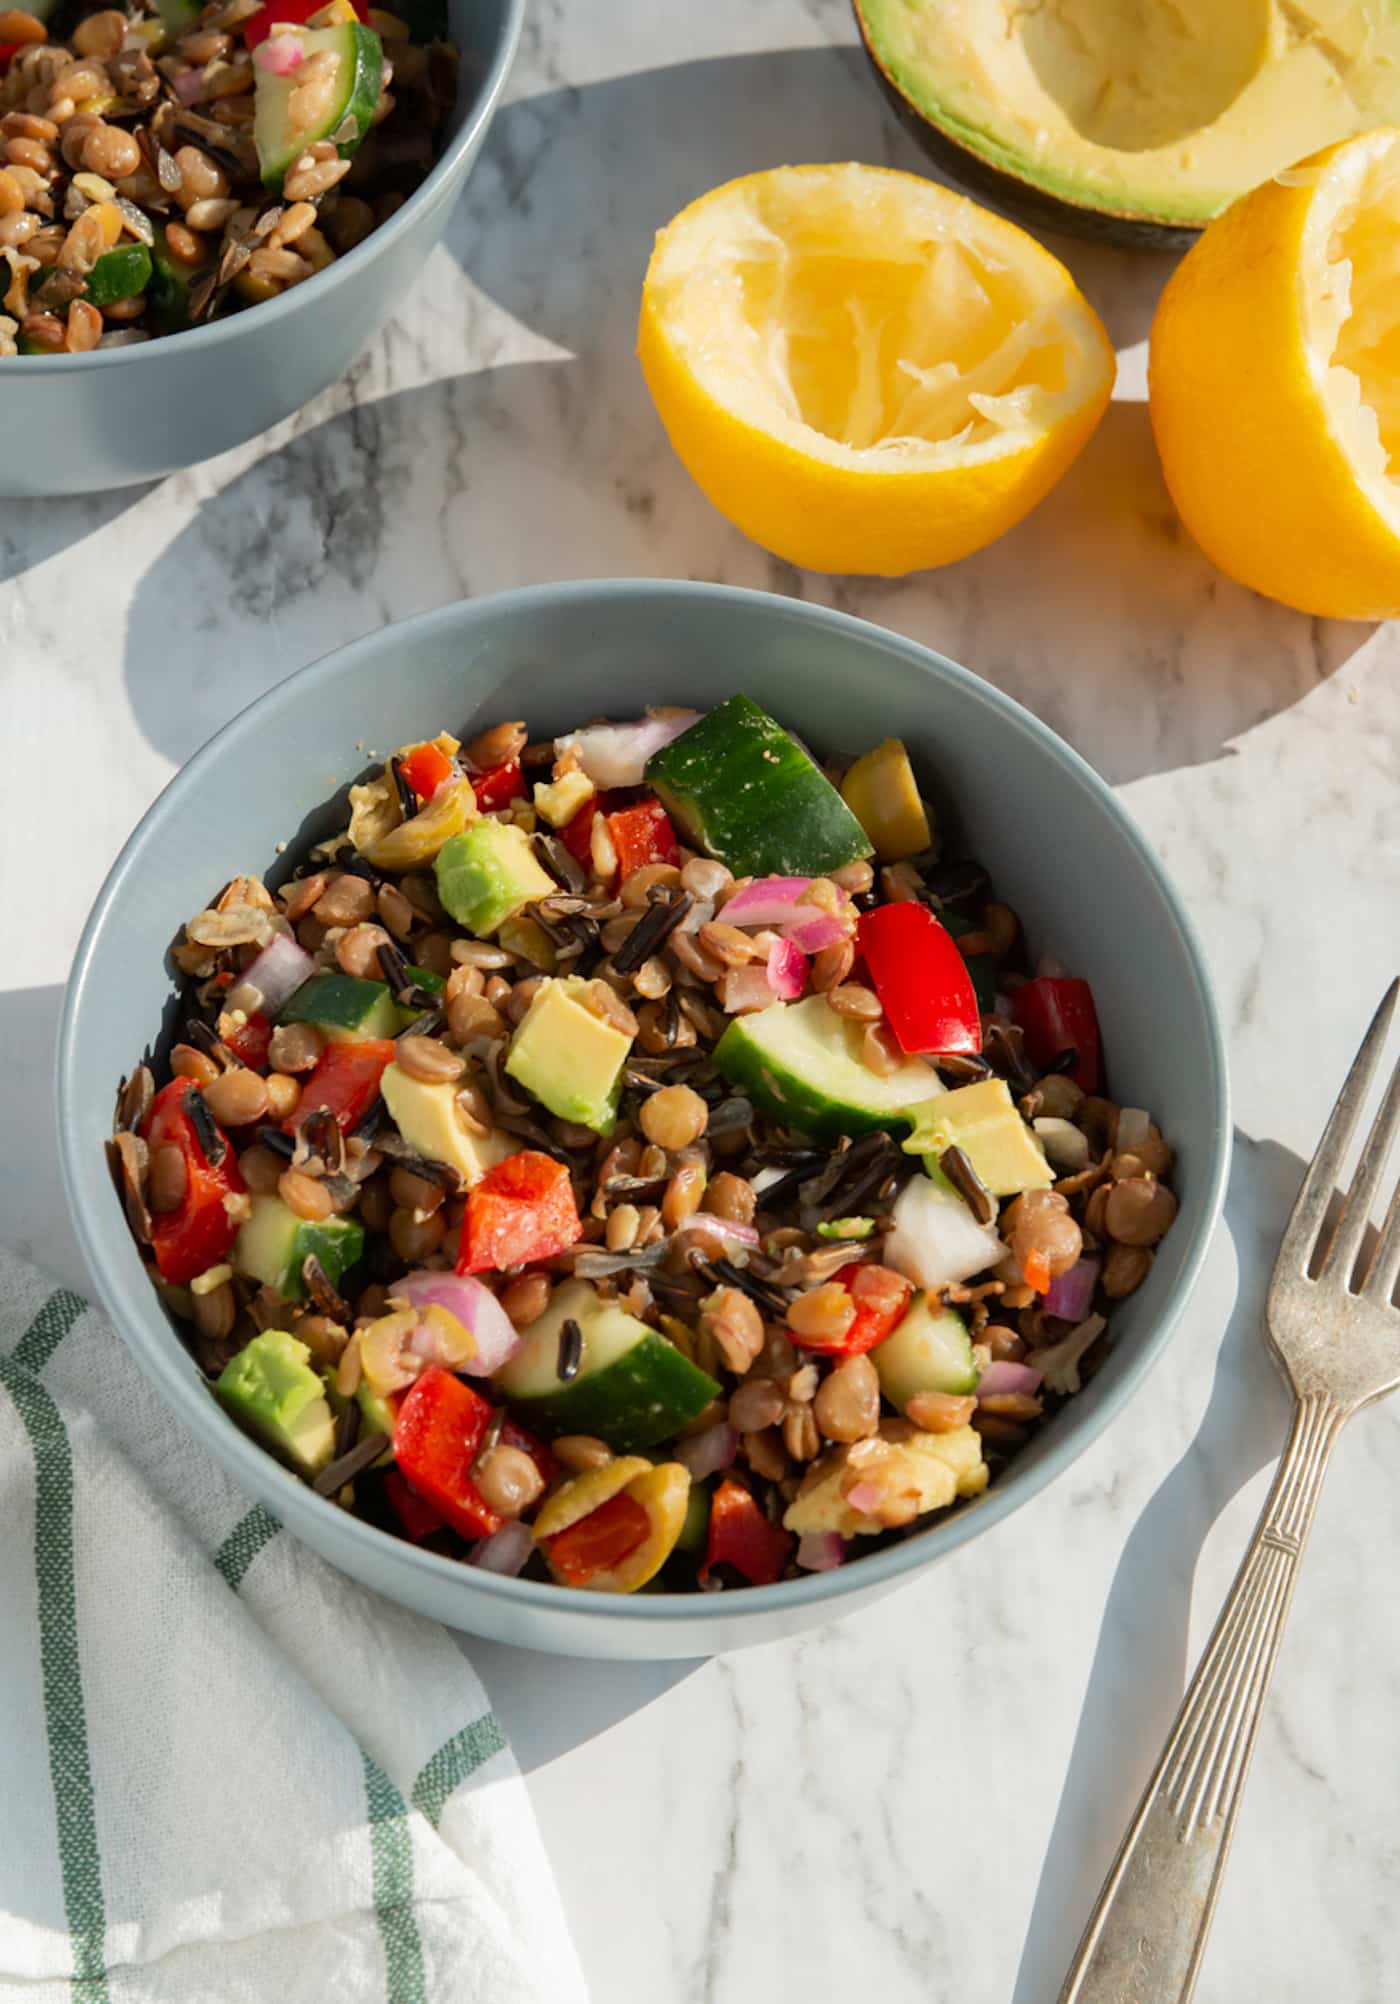 lentil and wild rice salad with chopped vegetables on a tabletop.